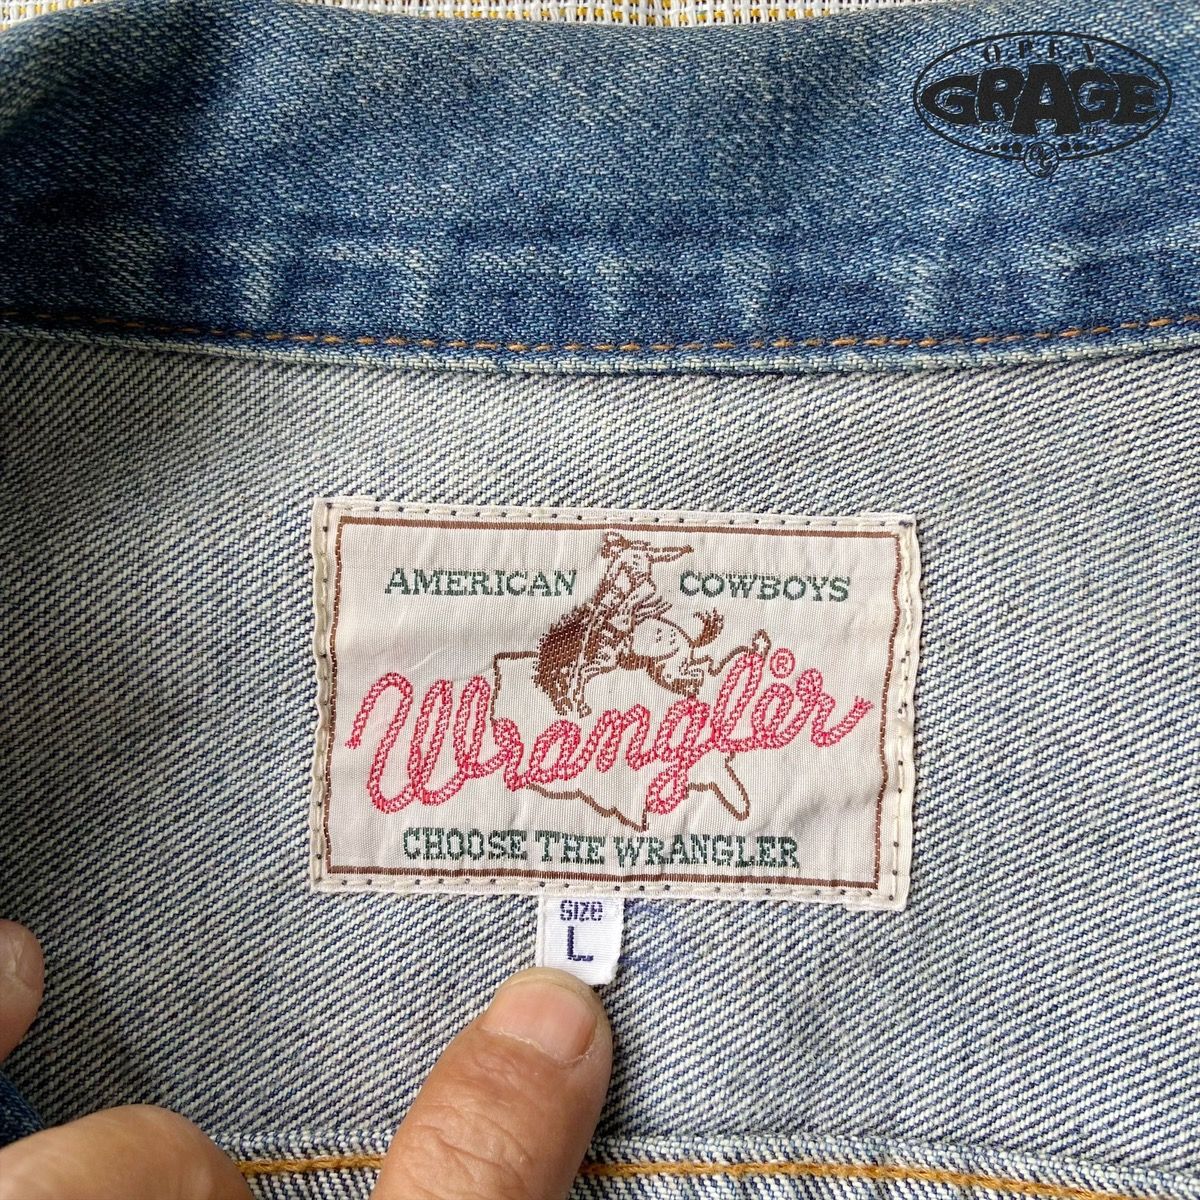 Archival Clothing - Collectible Classic VTG Wrangler Jean Jacket Worn by Icons - 4